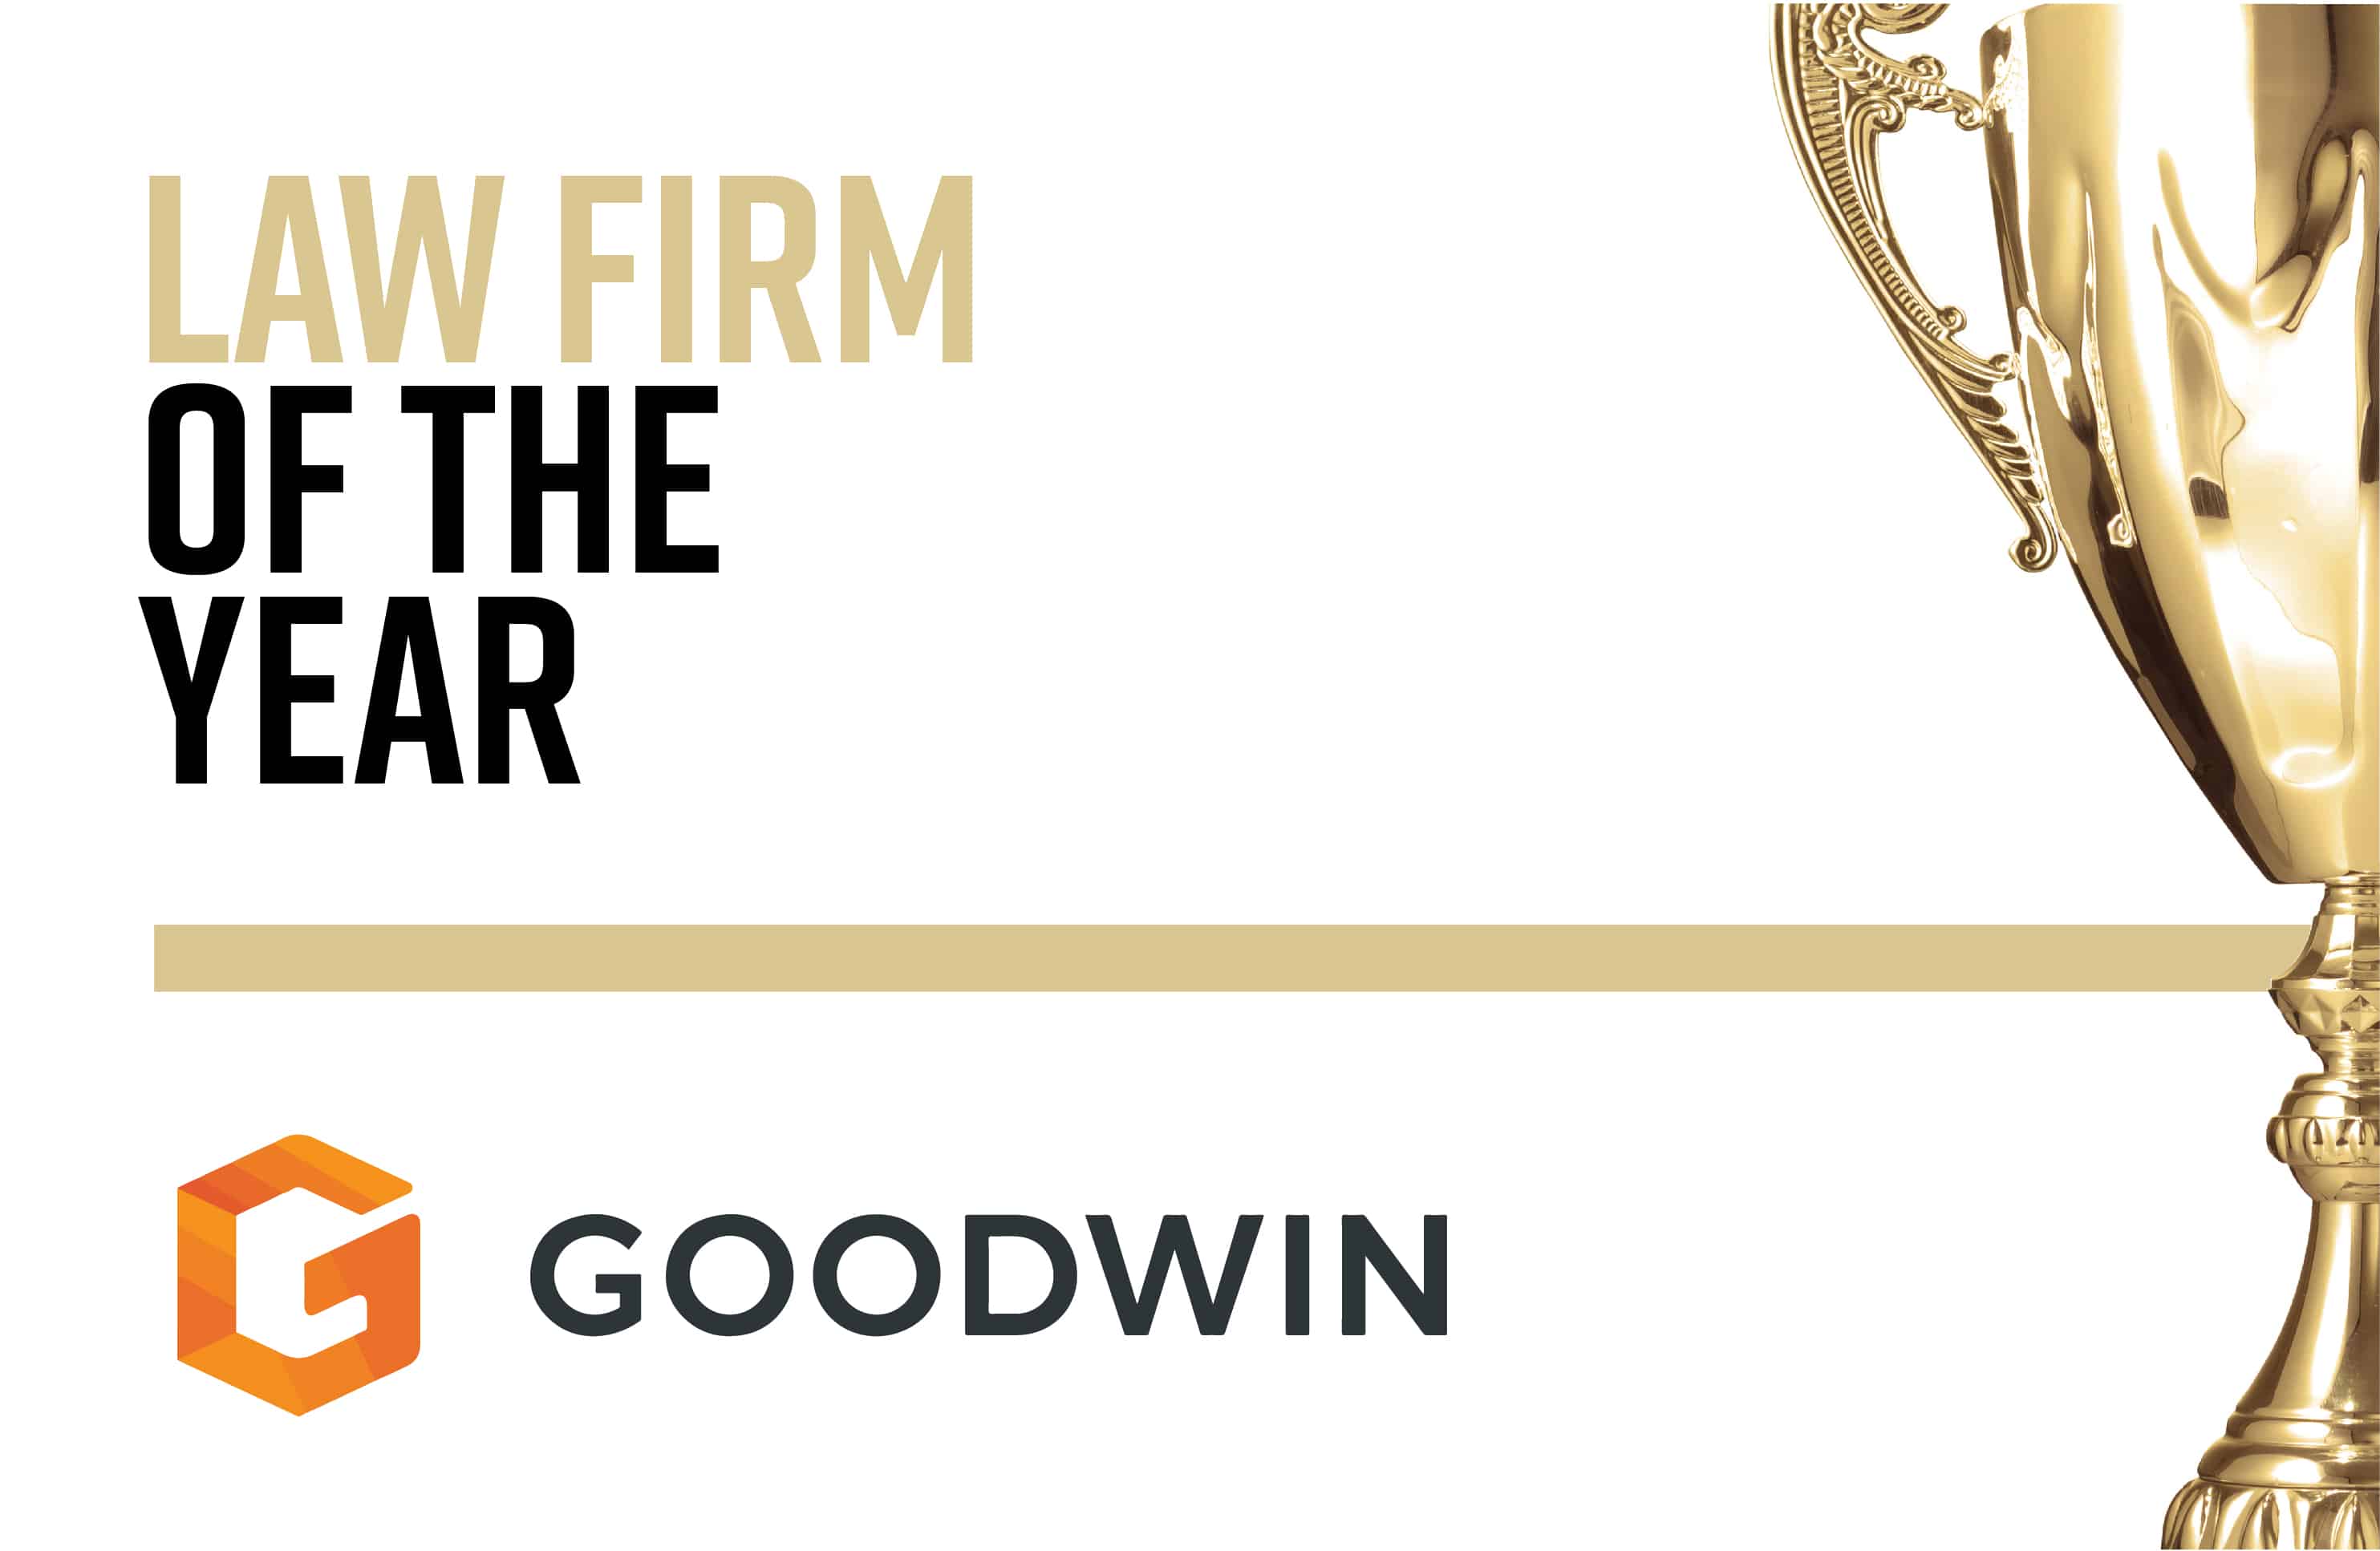 Law Firm of the Year: Goodwin